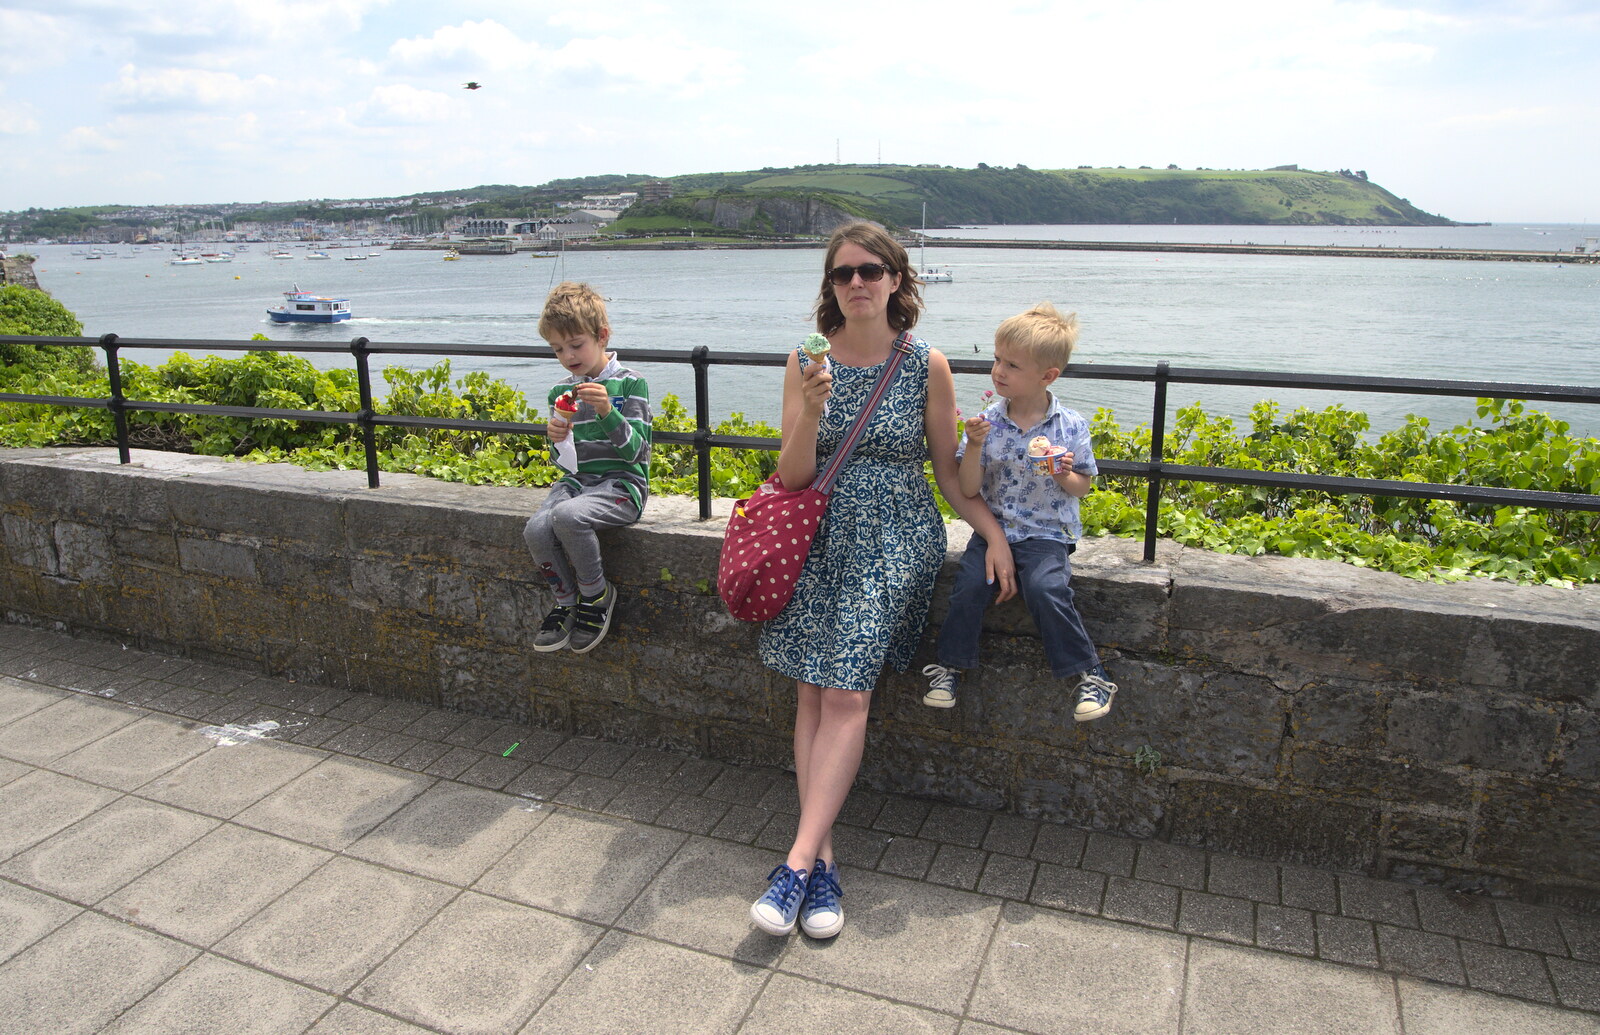 The gang eat ice cream from A Tamar River Trip, Plymouth, Devon - 30th May 2016